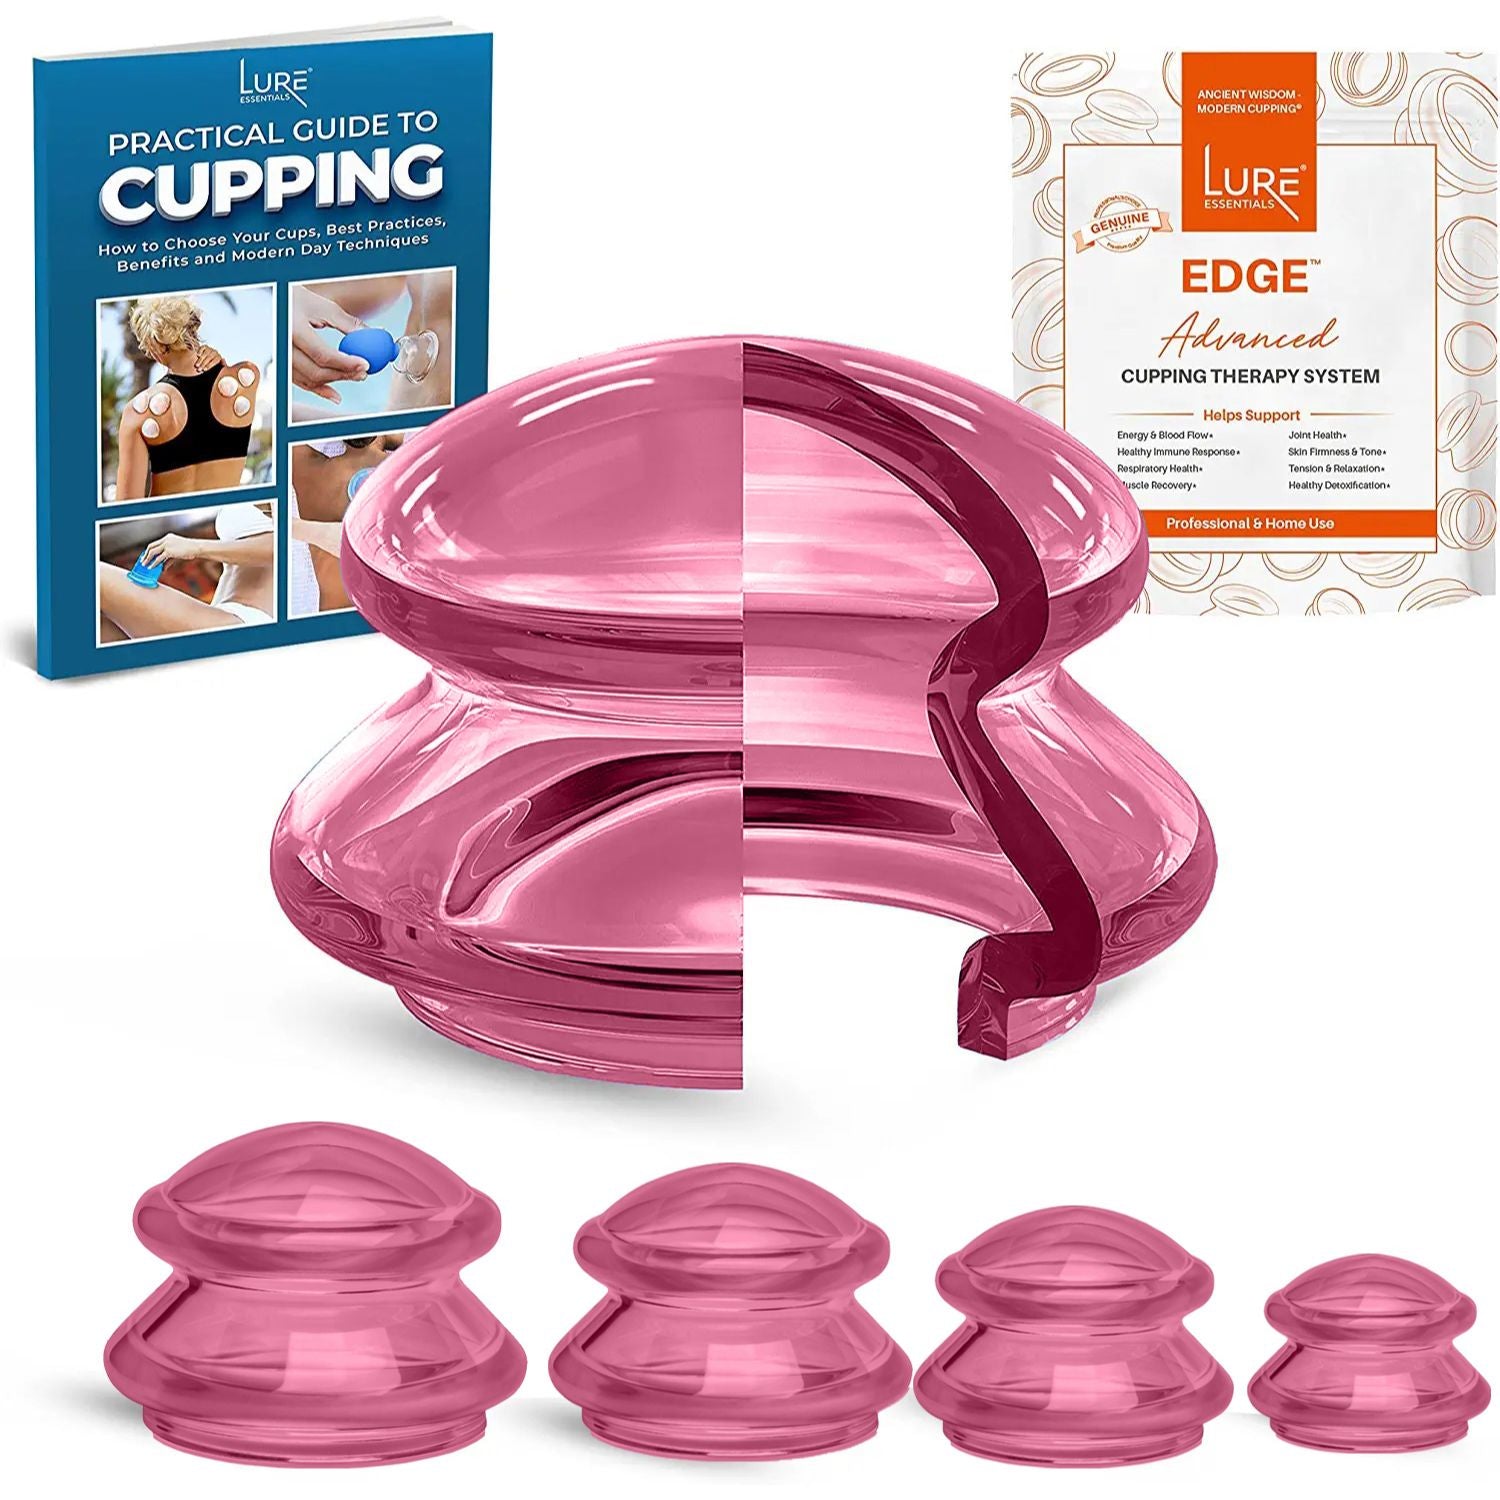 EDGE™ Cupping Set - 4 Cups Pink - Lure Essentials